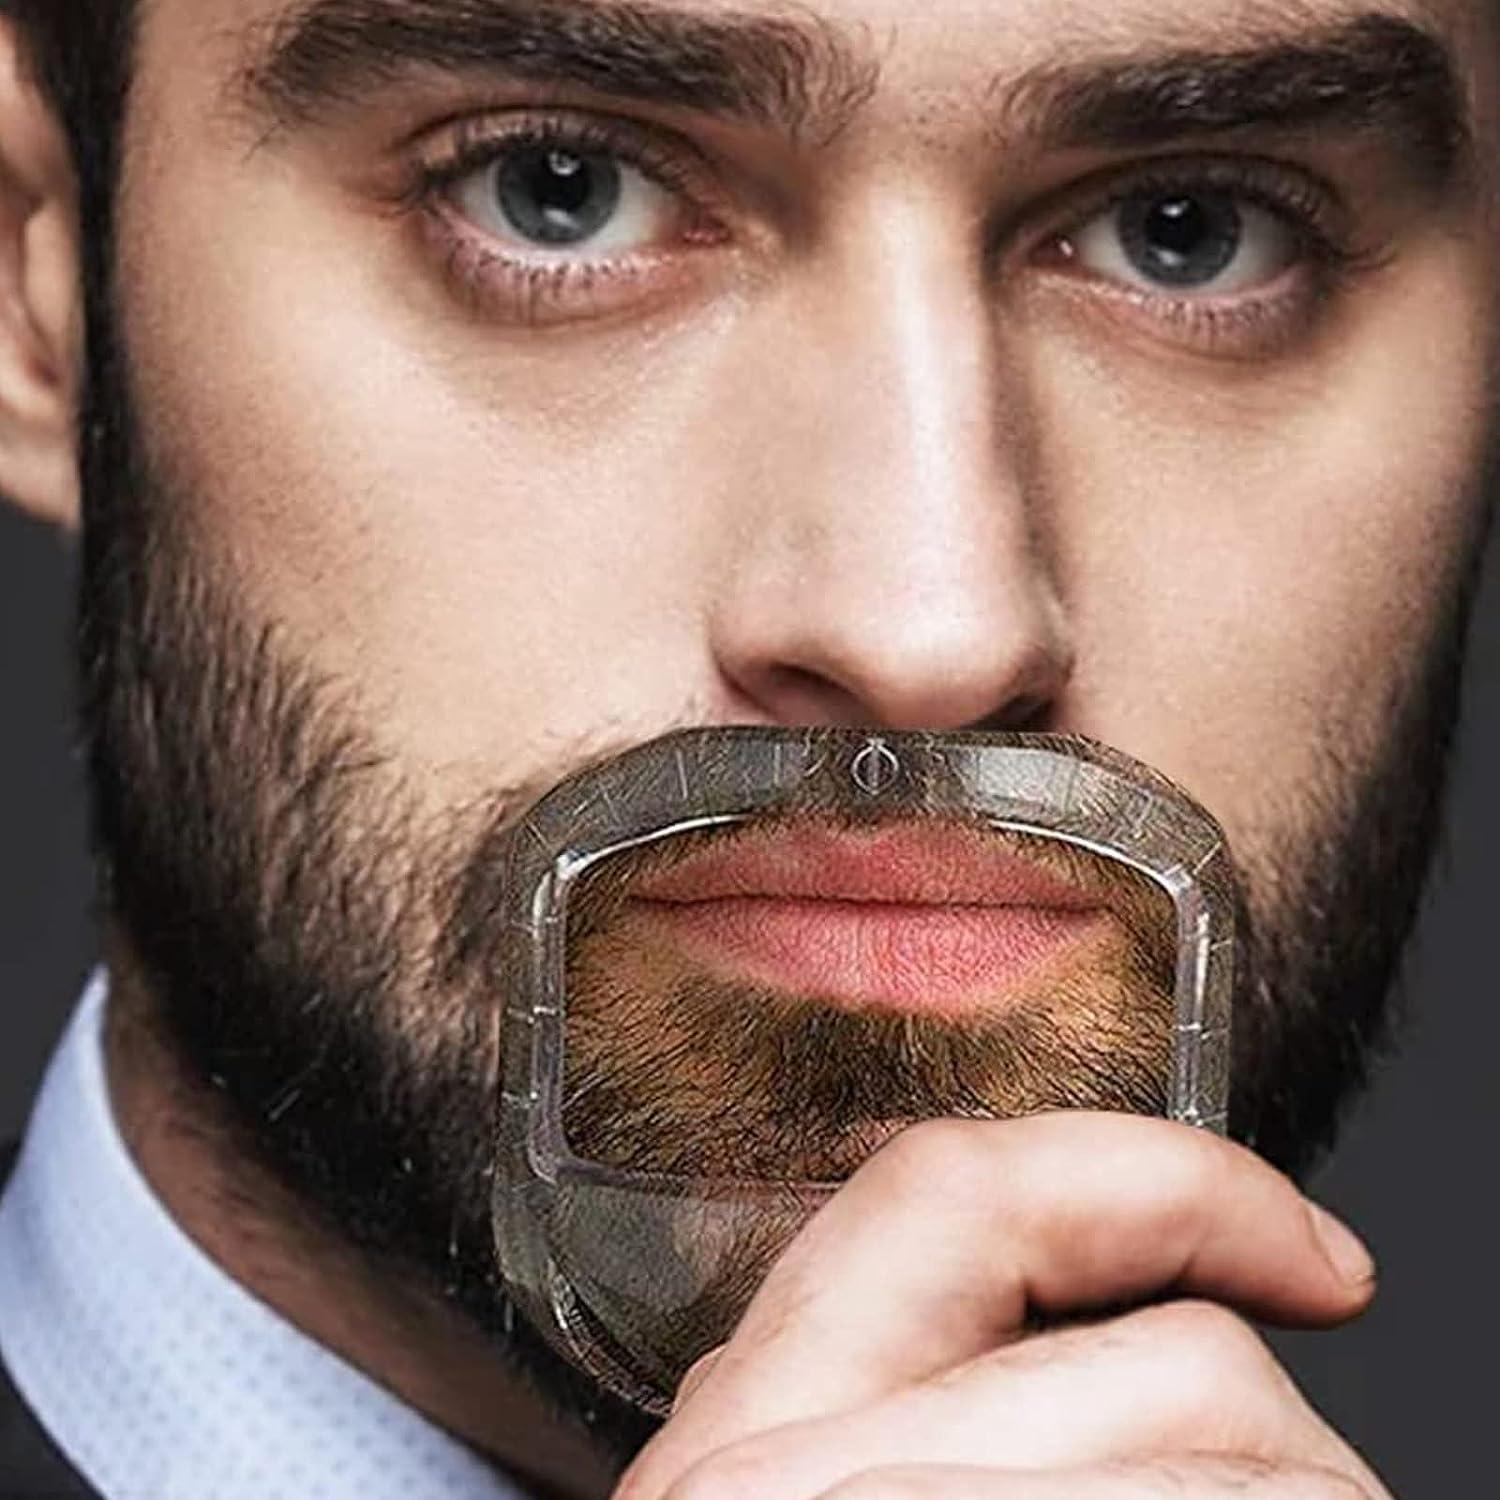 goatee-shaving-template-for-men-with-5-different-sizes-beard-guide